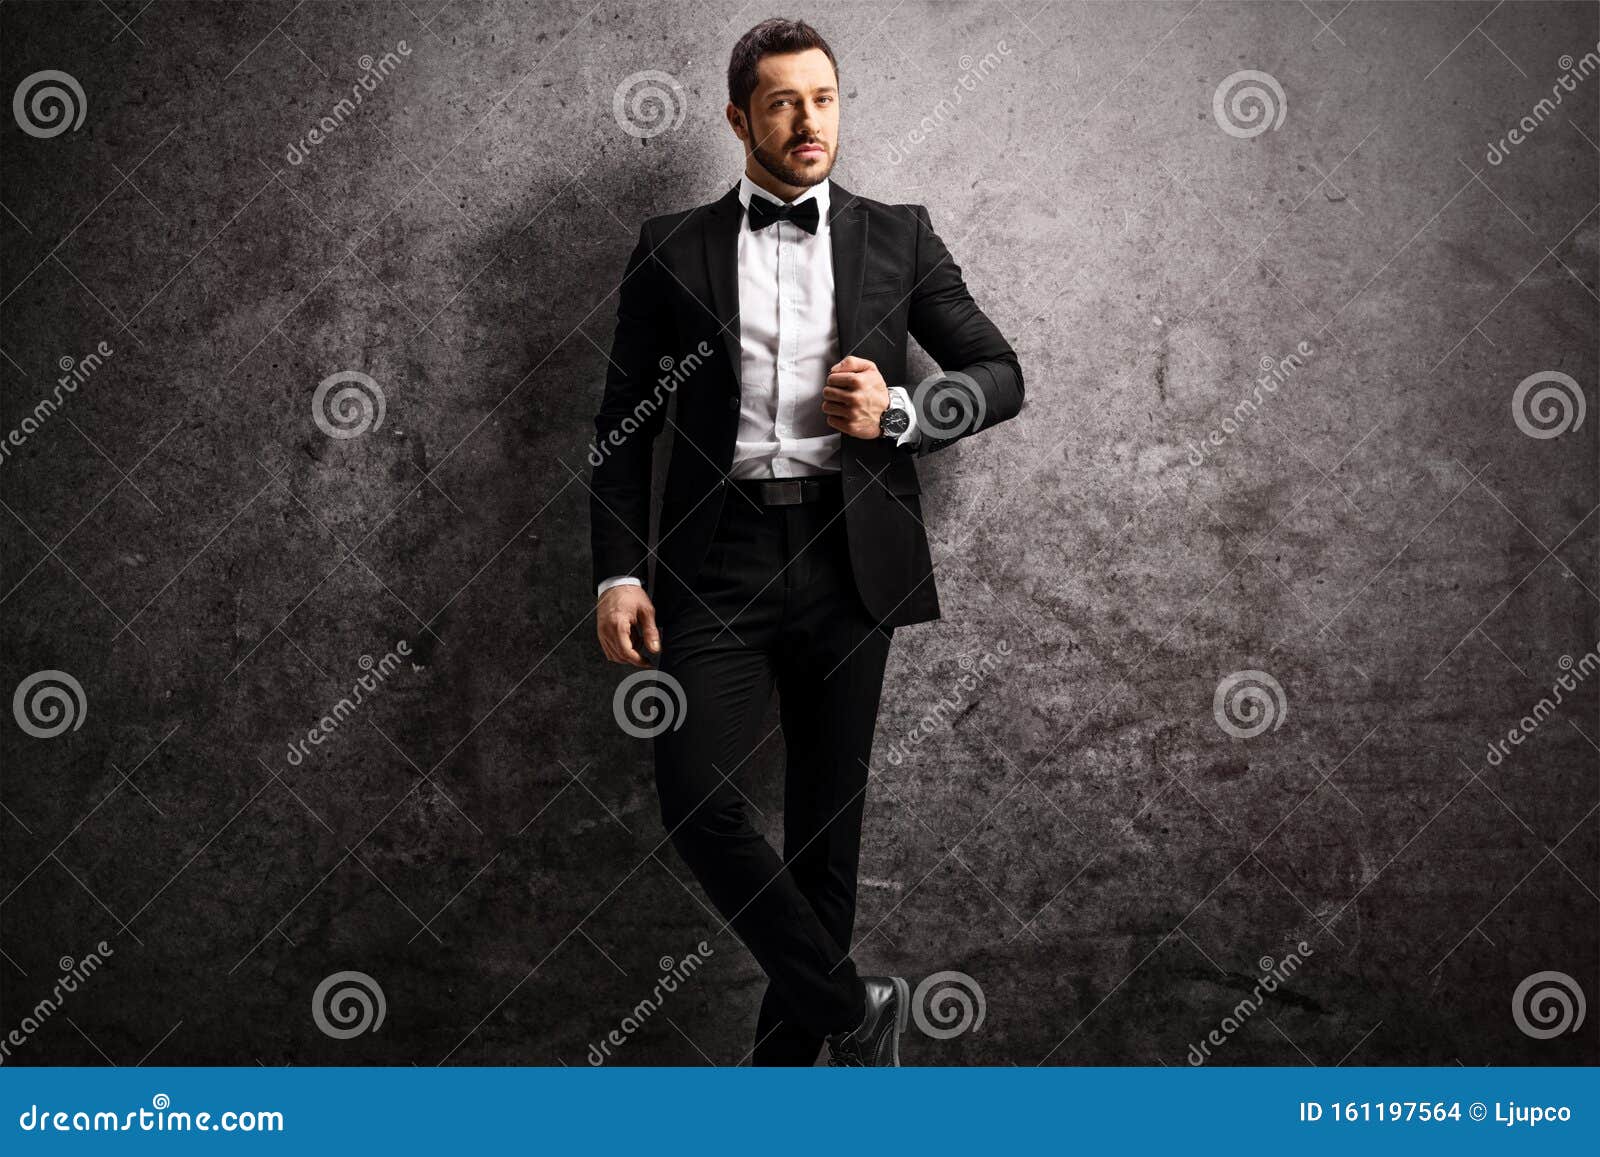 Young Man in a Black Suit and Bow Tie Stock Photo - Image of fashion ...